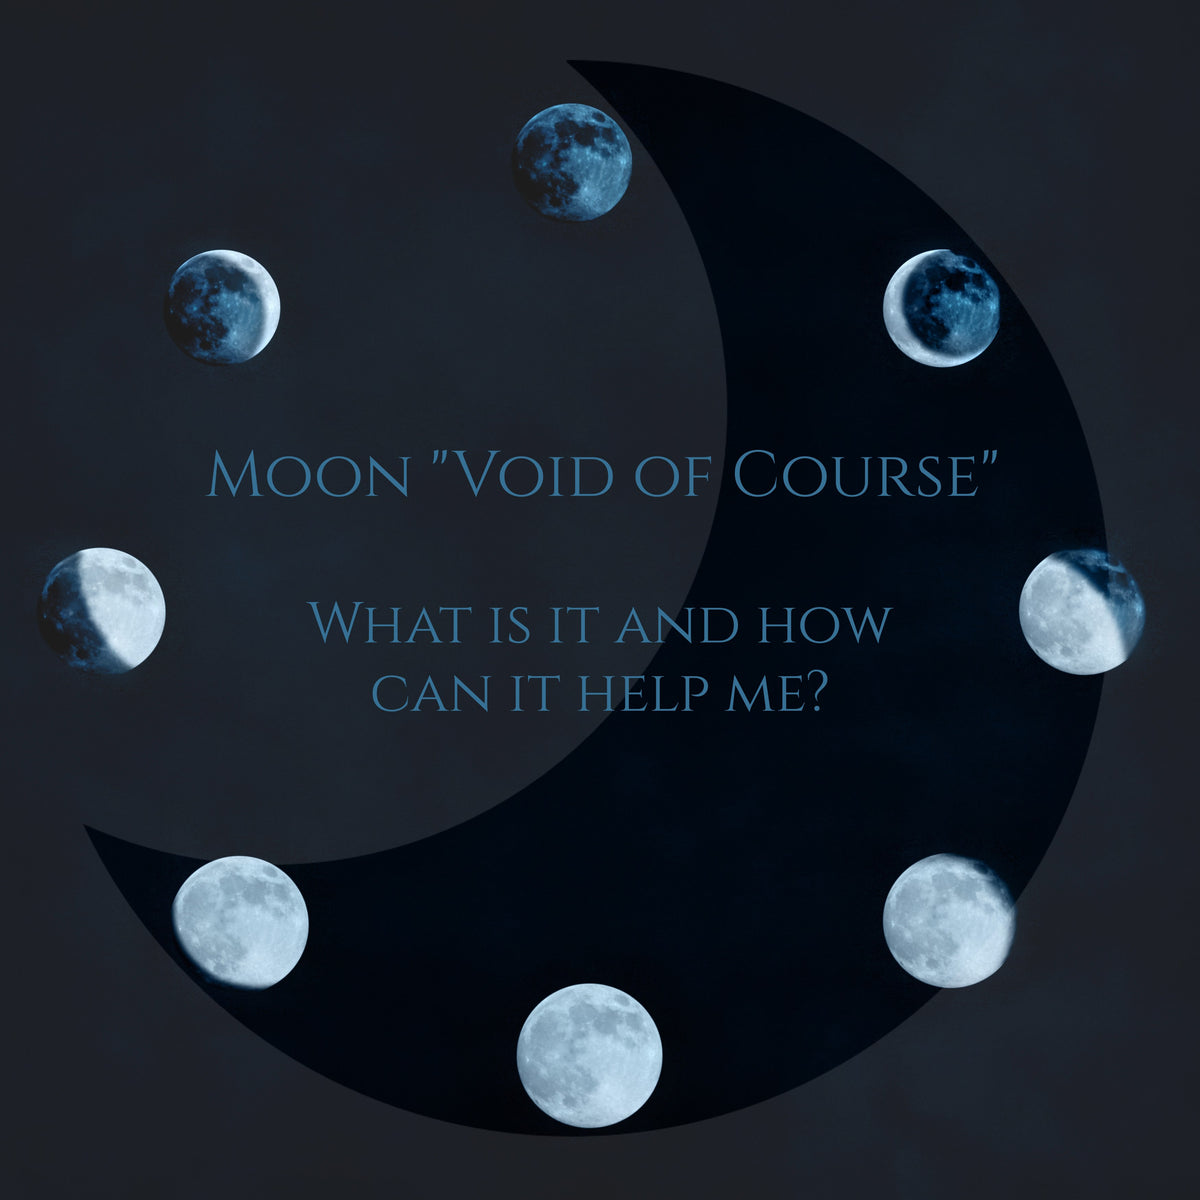 Moon "Void of Course" Meaning Galactic Mystic